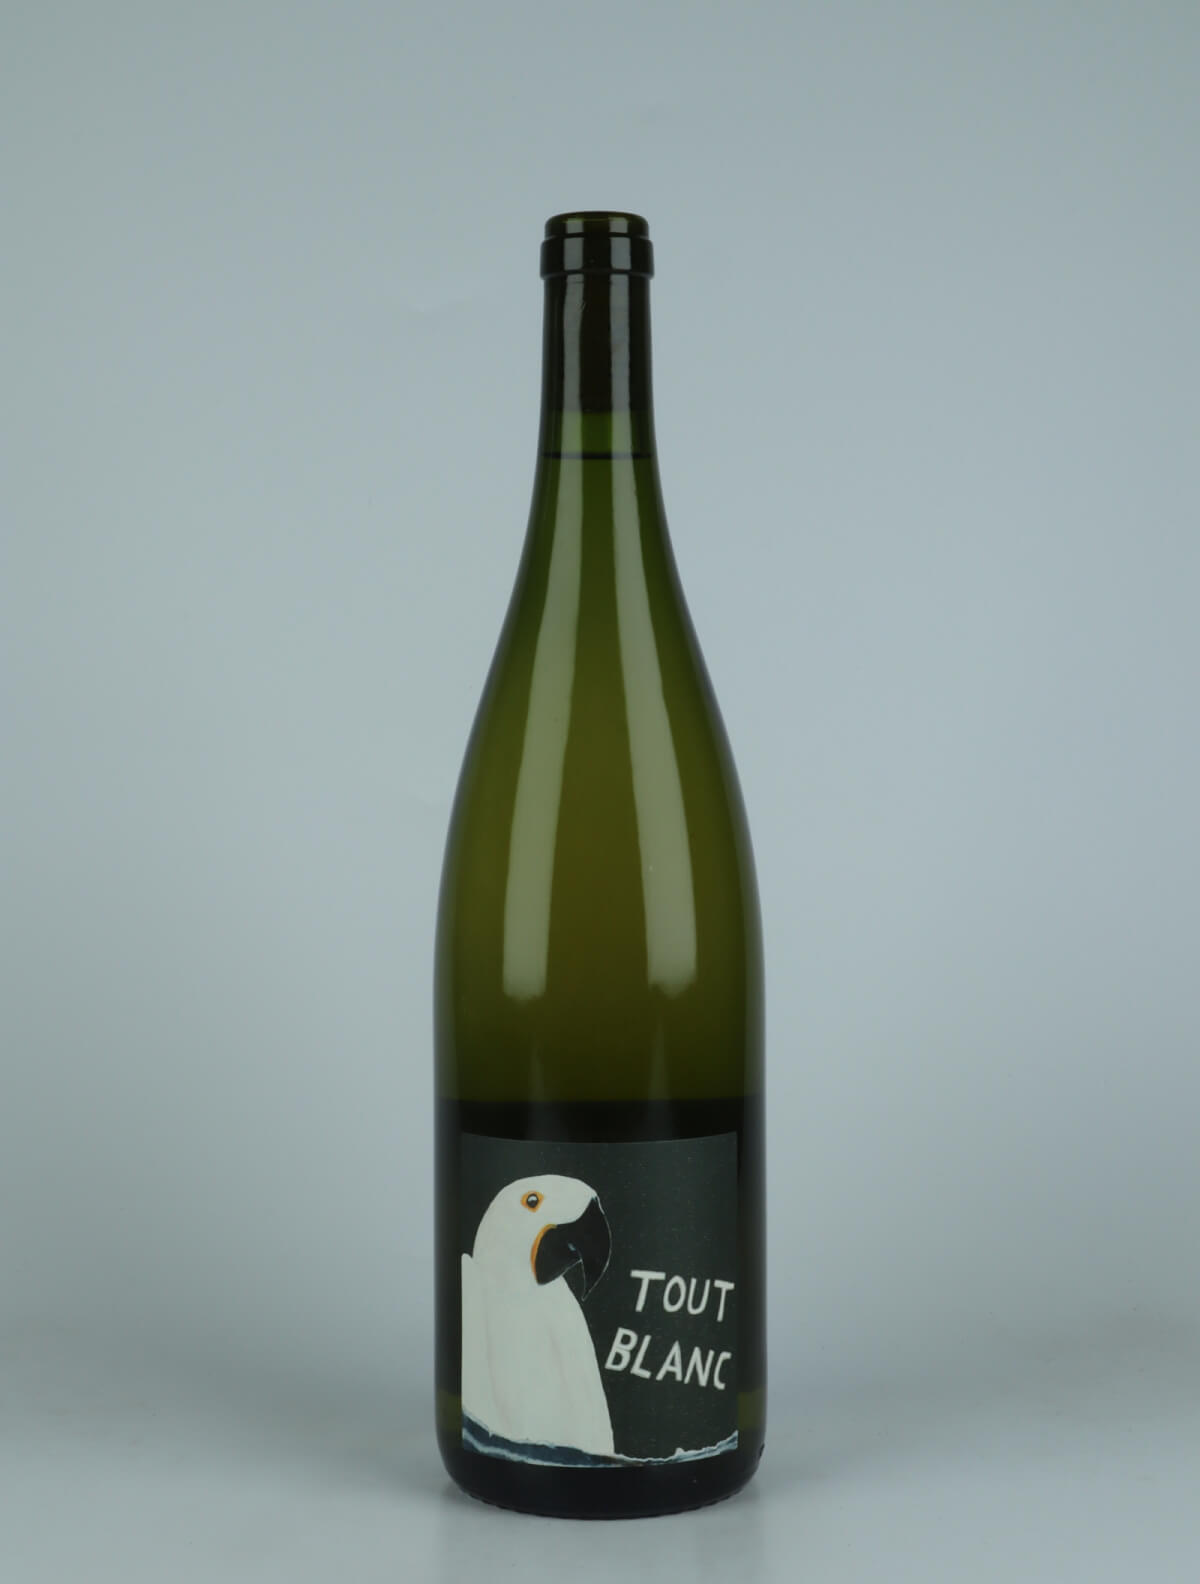 A bottle 2023 Tout Blanc - Litre White wine from Domaine Rietsch, Alsace in France